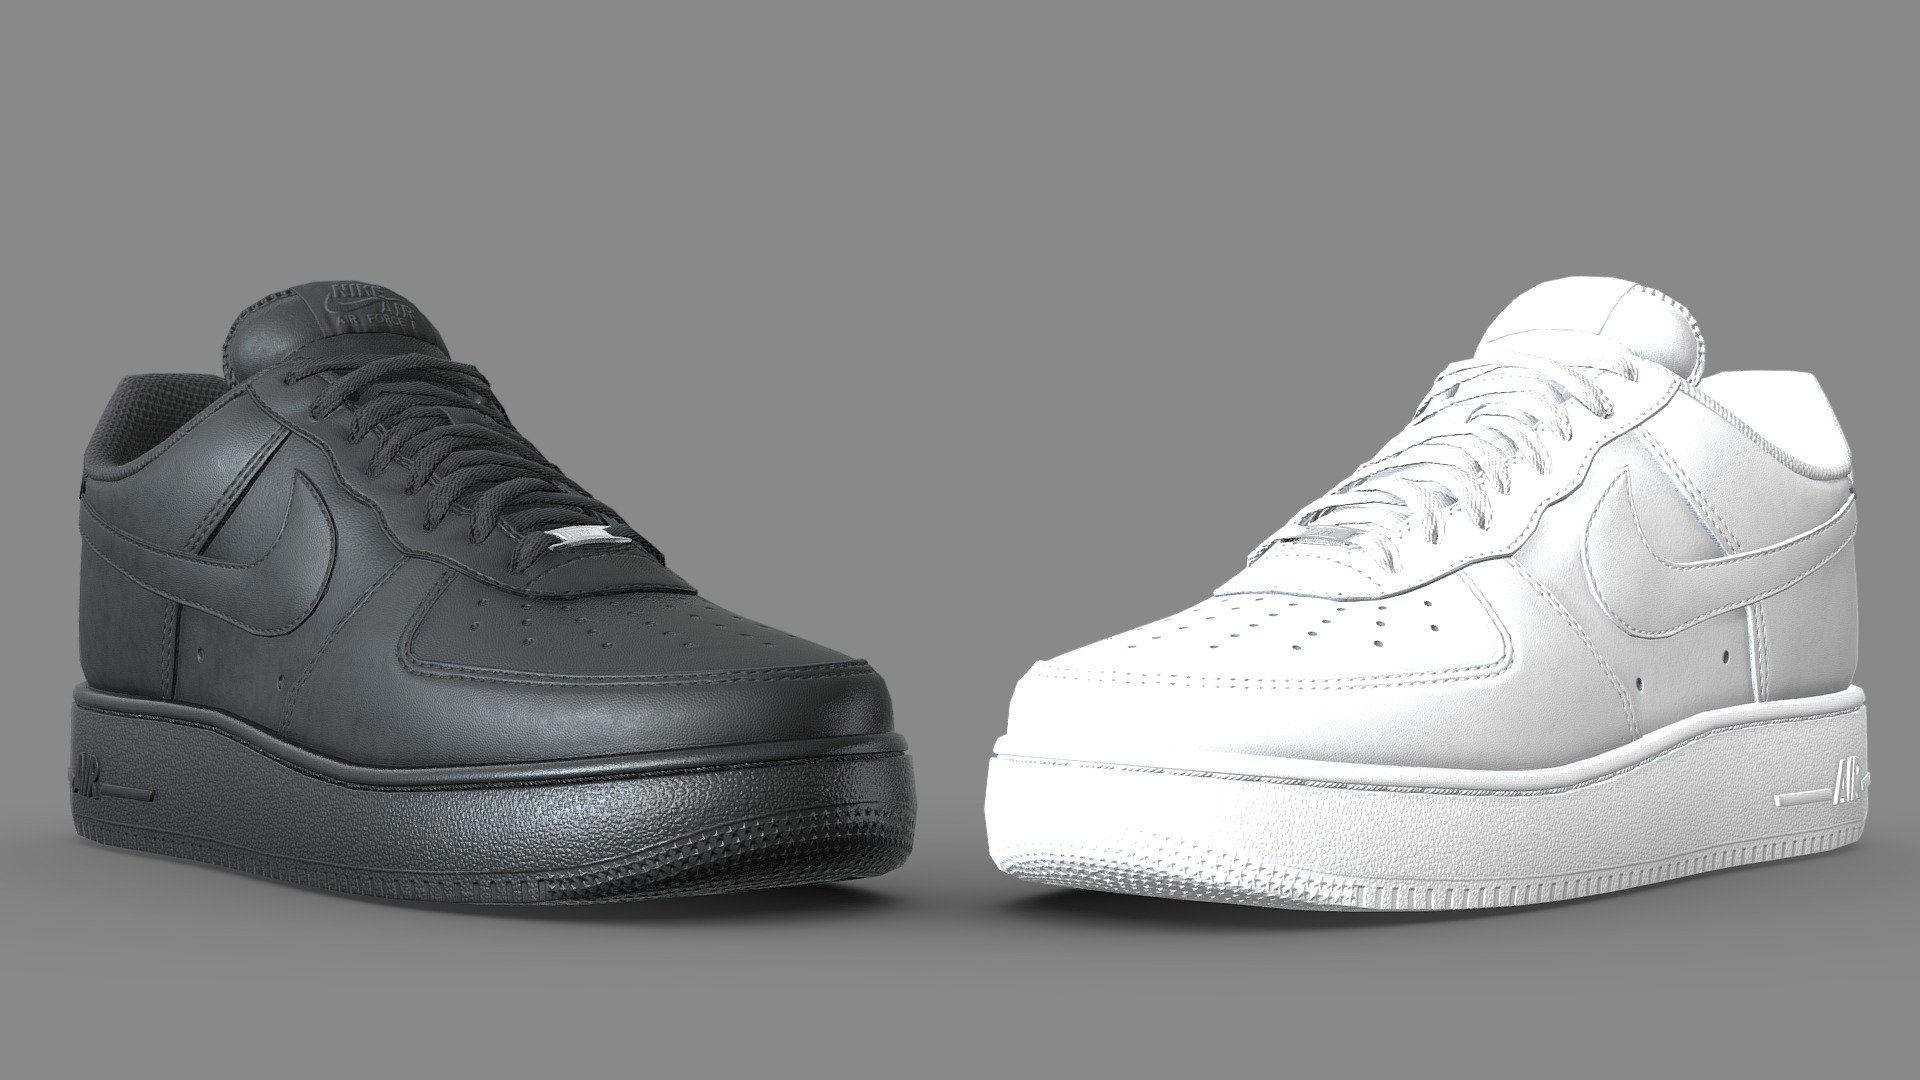 Nike Air Force 1 in both Triple White and Black. The most popular sneaker on the planet, and a staple in many wardrobes. Made with performance in mind, these shoes look best from a far and each pair uses just one texture set.

The shoe has 15,605 polys (31,210 for the pair) and one texture set, comprised of Base Color, Metallic, Roughness, and a Normal map. 

The full detail version of the shoes can be found here:https://skfb.ly/oE7vO  (this optimised version is included with those full detail versions) - Nike Air Force One Optimised - Buy Royalty Free 3D model by Joe-Wall (@joewall) 3d model